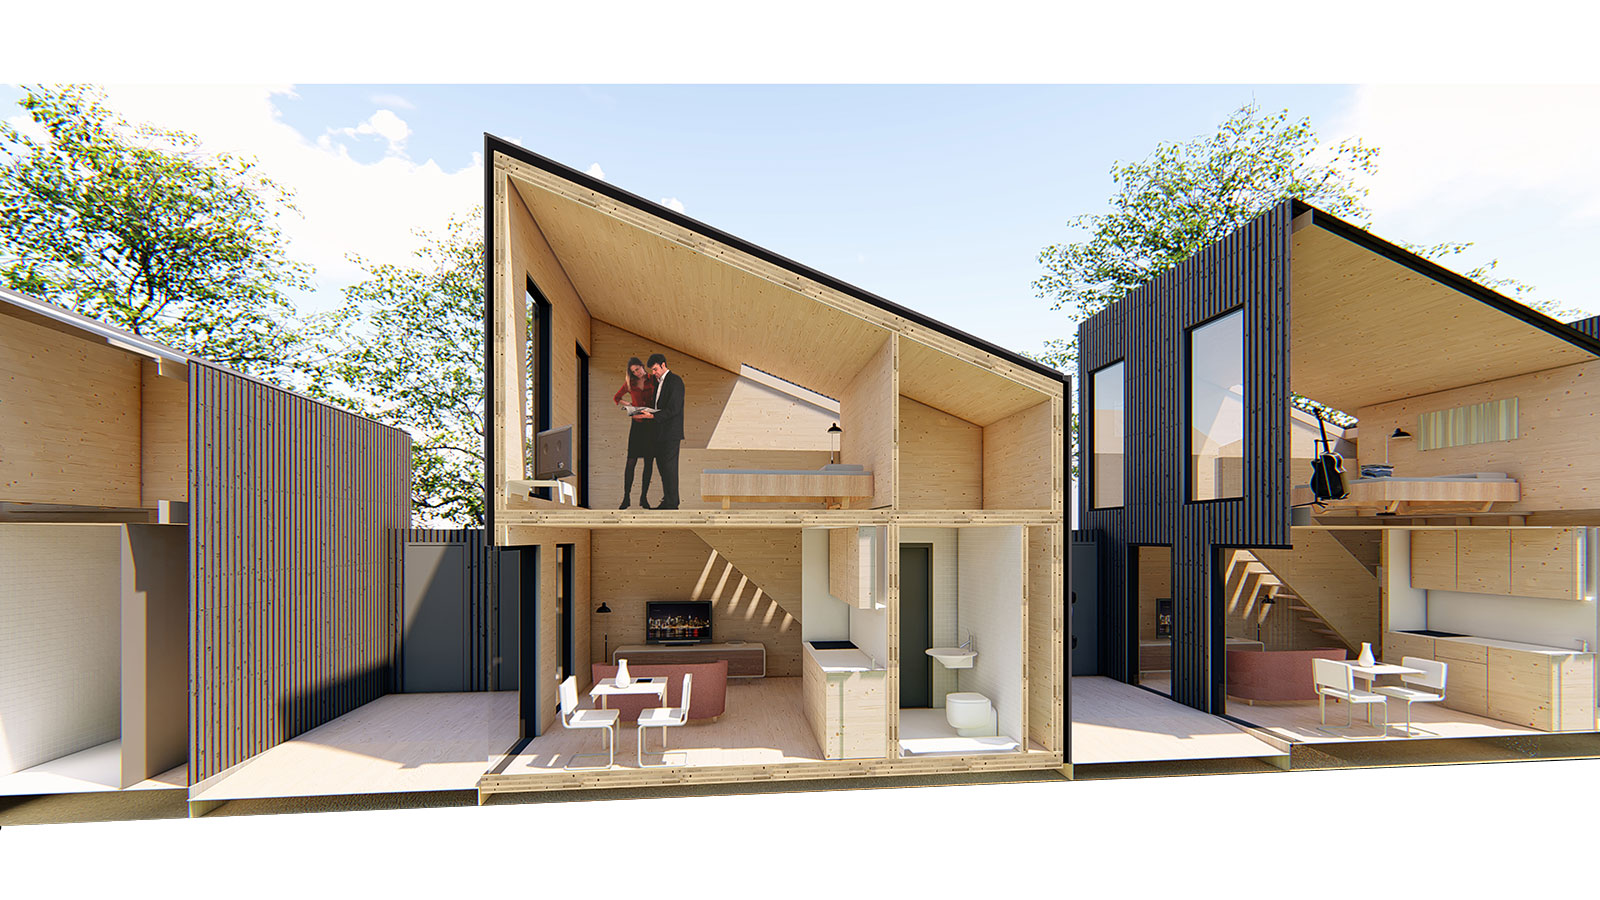 Our Gap House concept has the potential to revitalise neighbourhoods and provide more homes up and down the country.